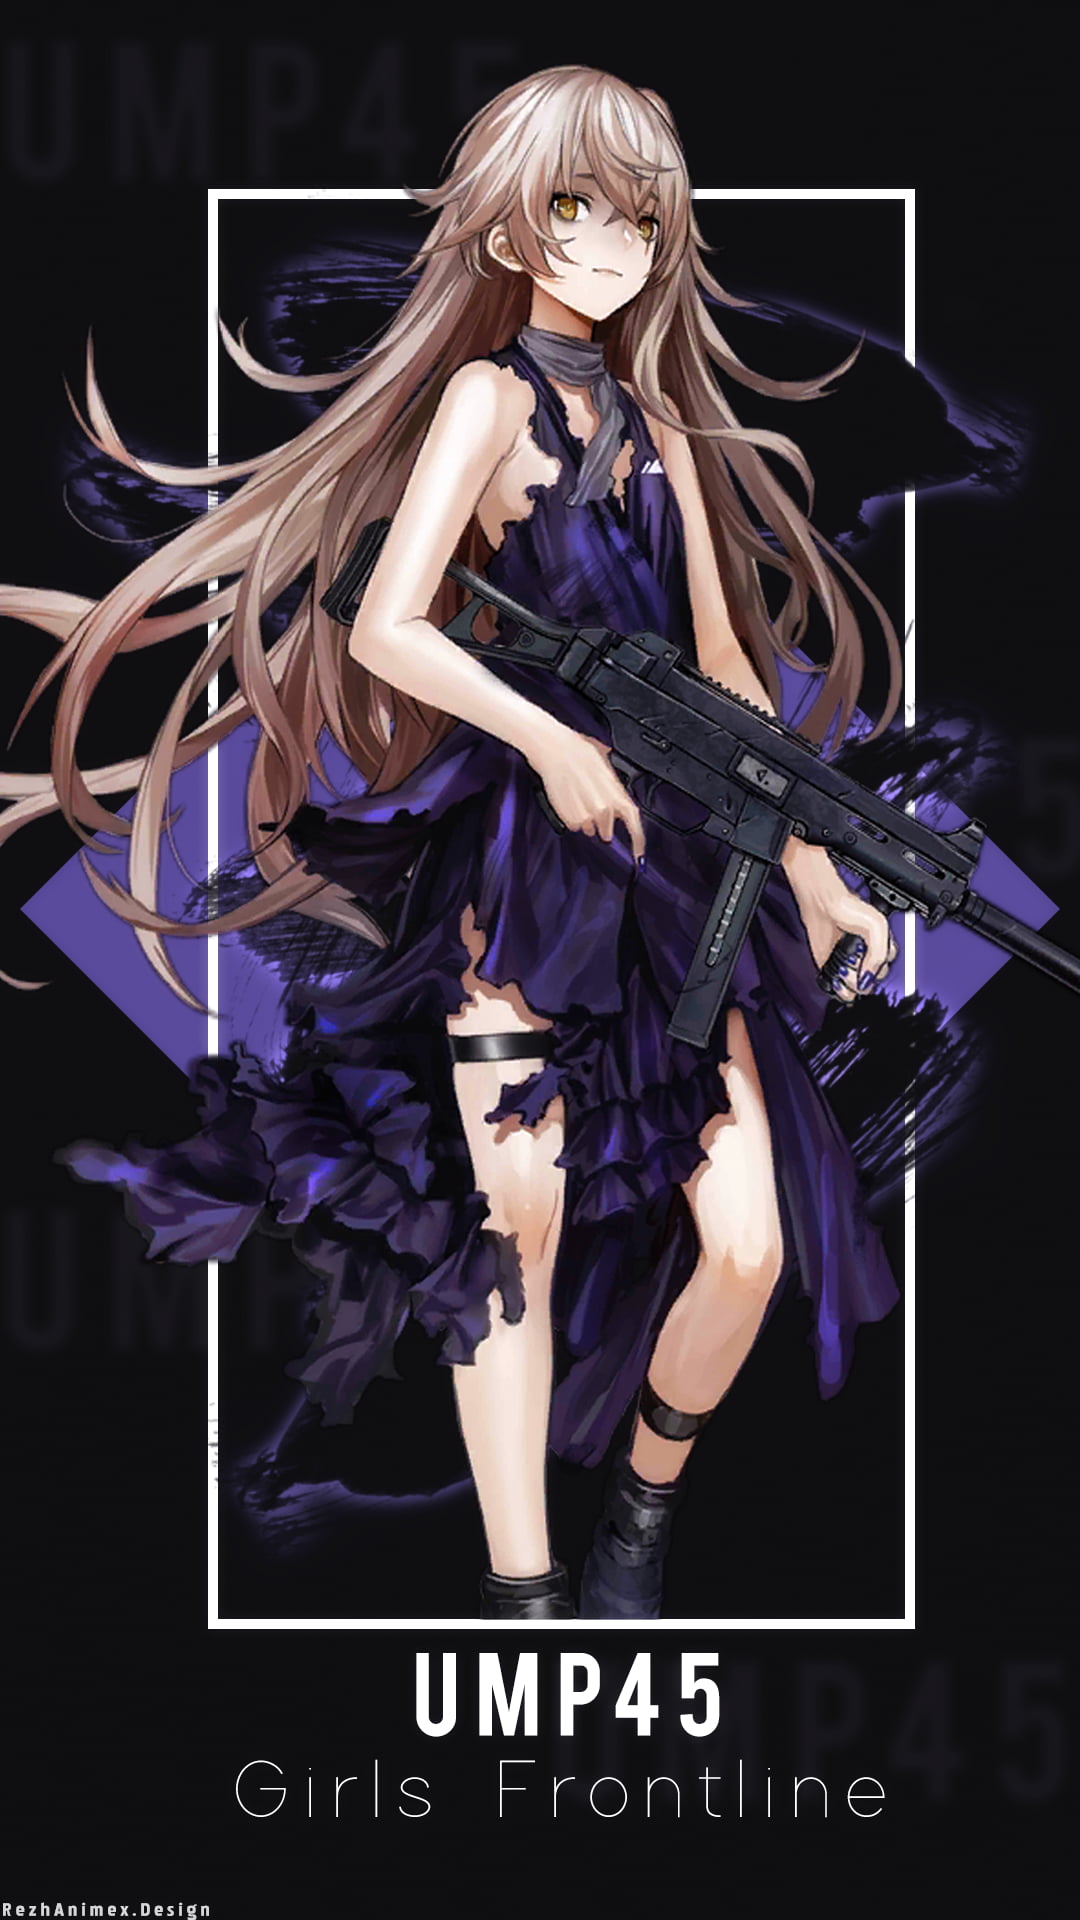 Girl With Weapon, girl front line, ump45 (Girls' Frontline)